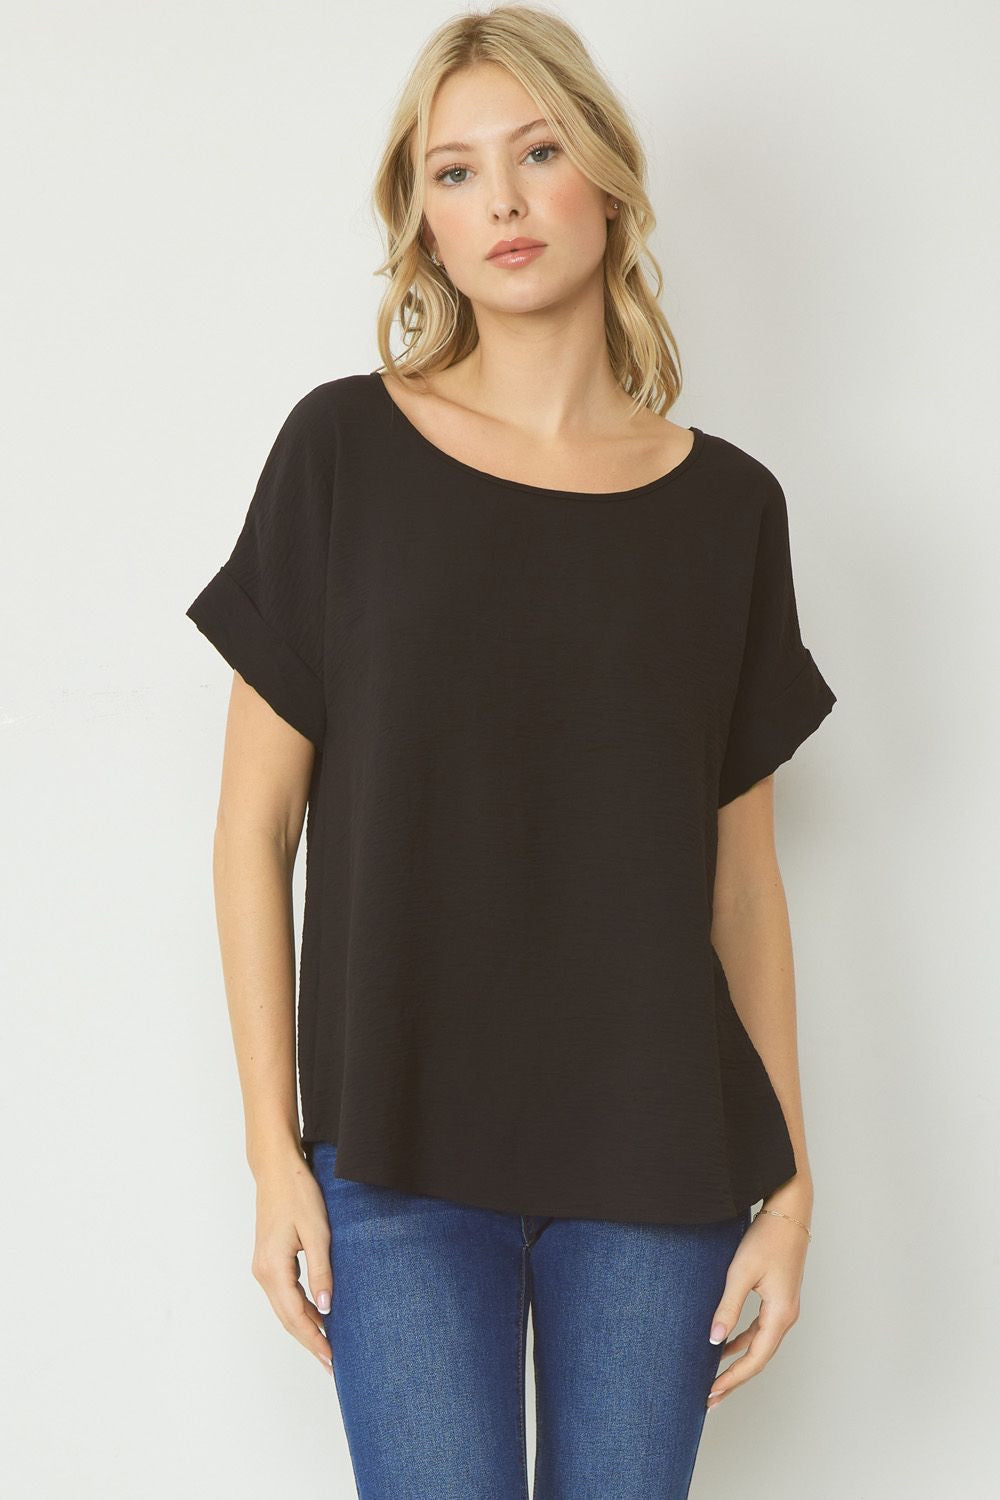 Black scoop-neck top featuring permanent rolled sleeve detail and an asymmetrical hem.